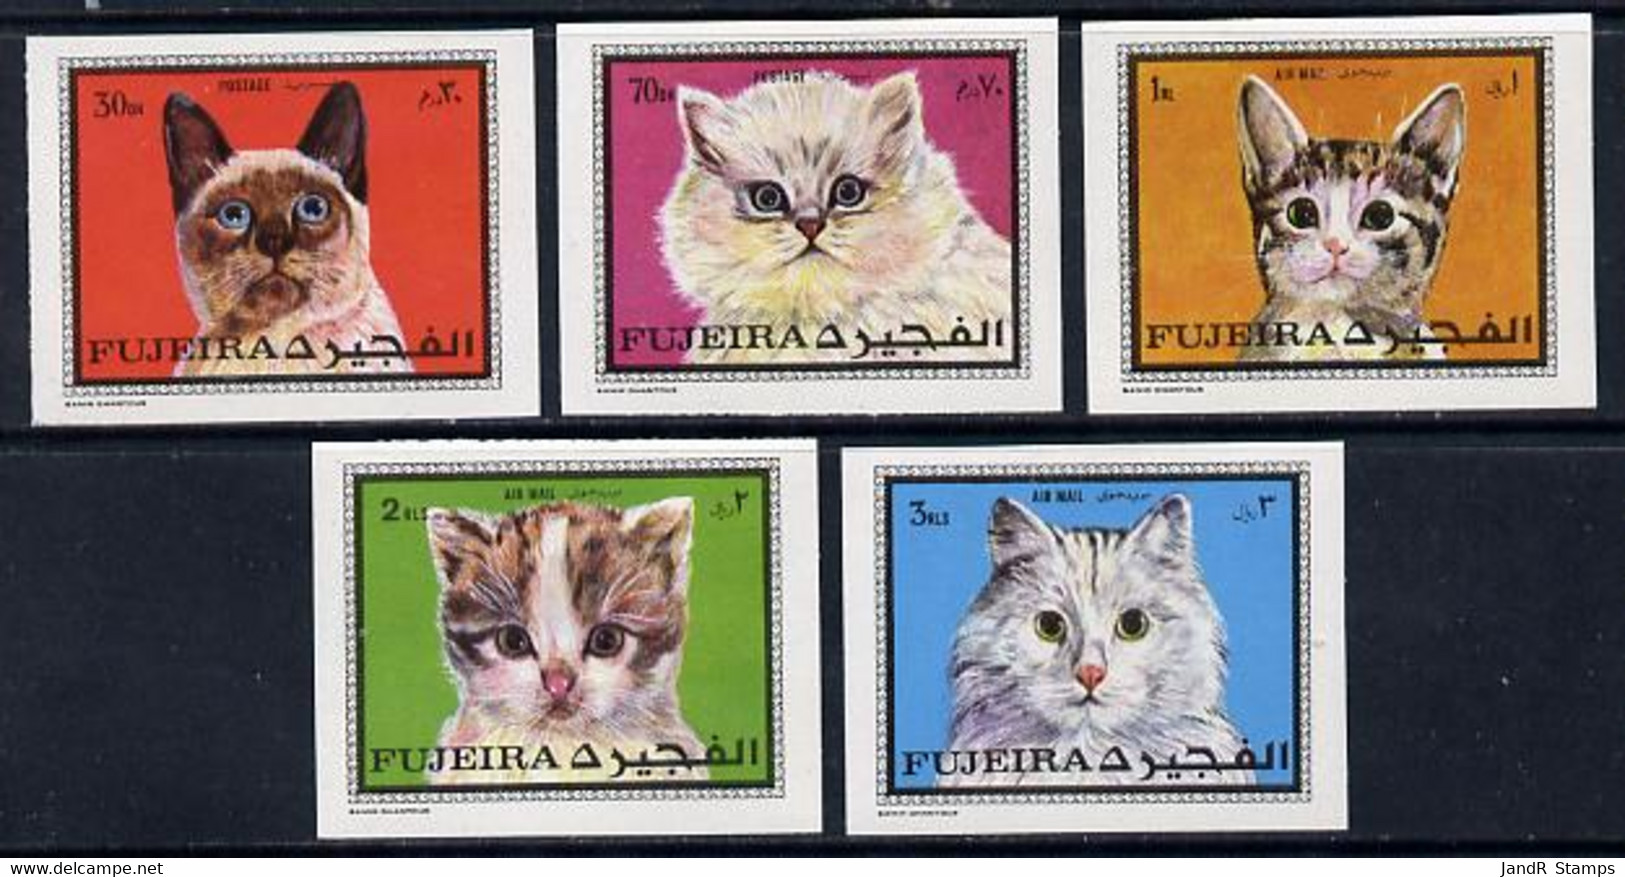 MALAYA - PAHANG 1895-99 Tigers Set Of 3 Overprinted SPECIMEN Mainly Fine And Only About 750 Produced SG 14s-16s - Malaya (British Military Administration)